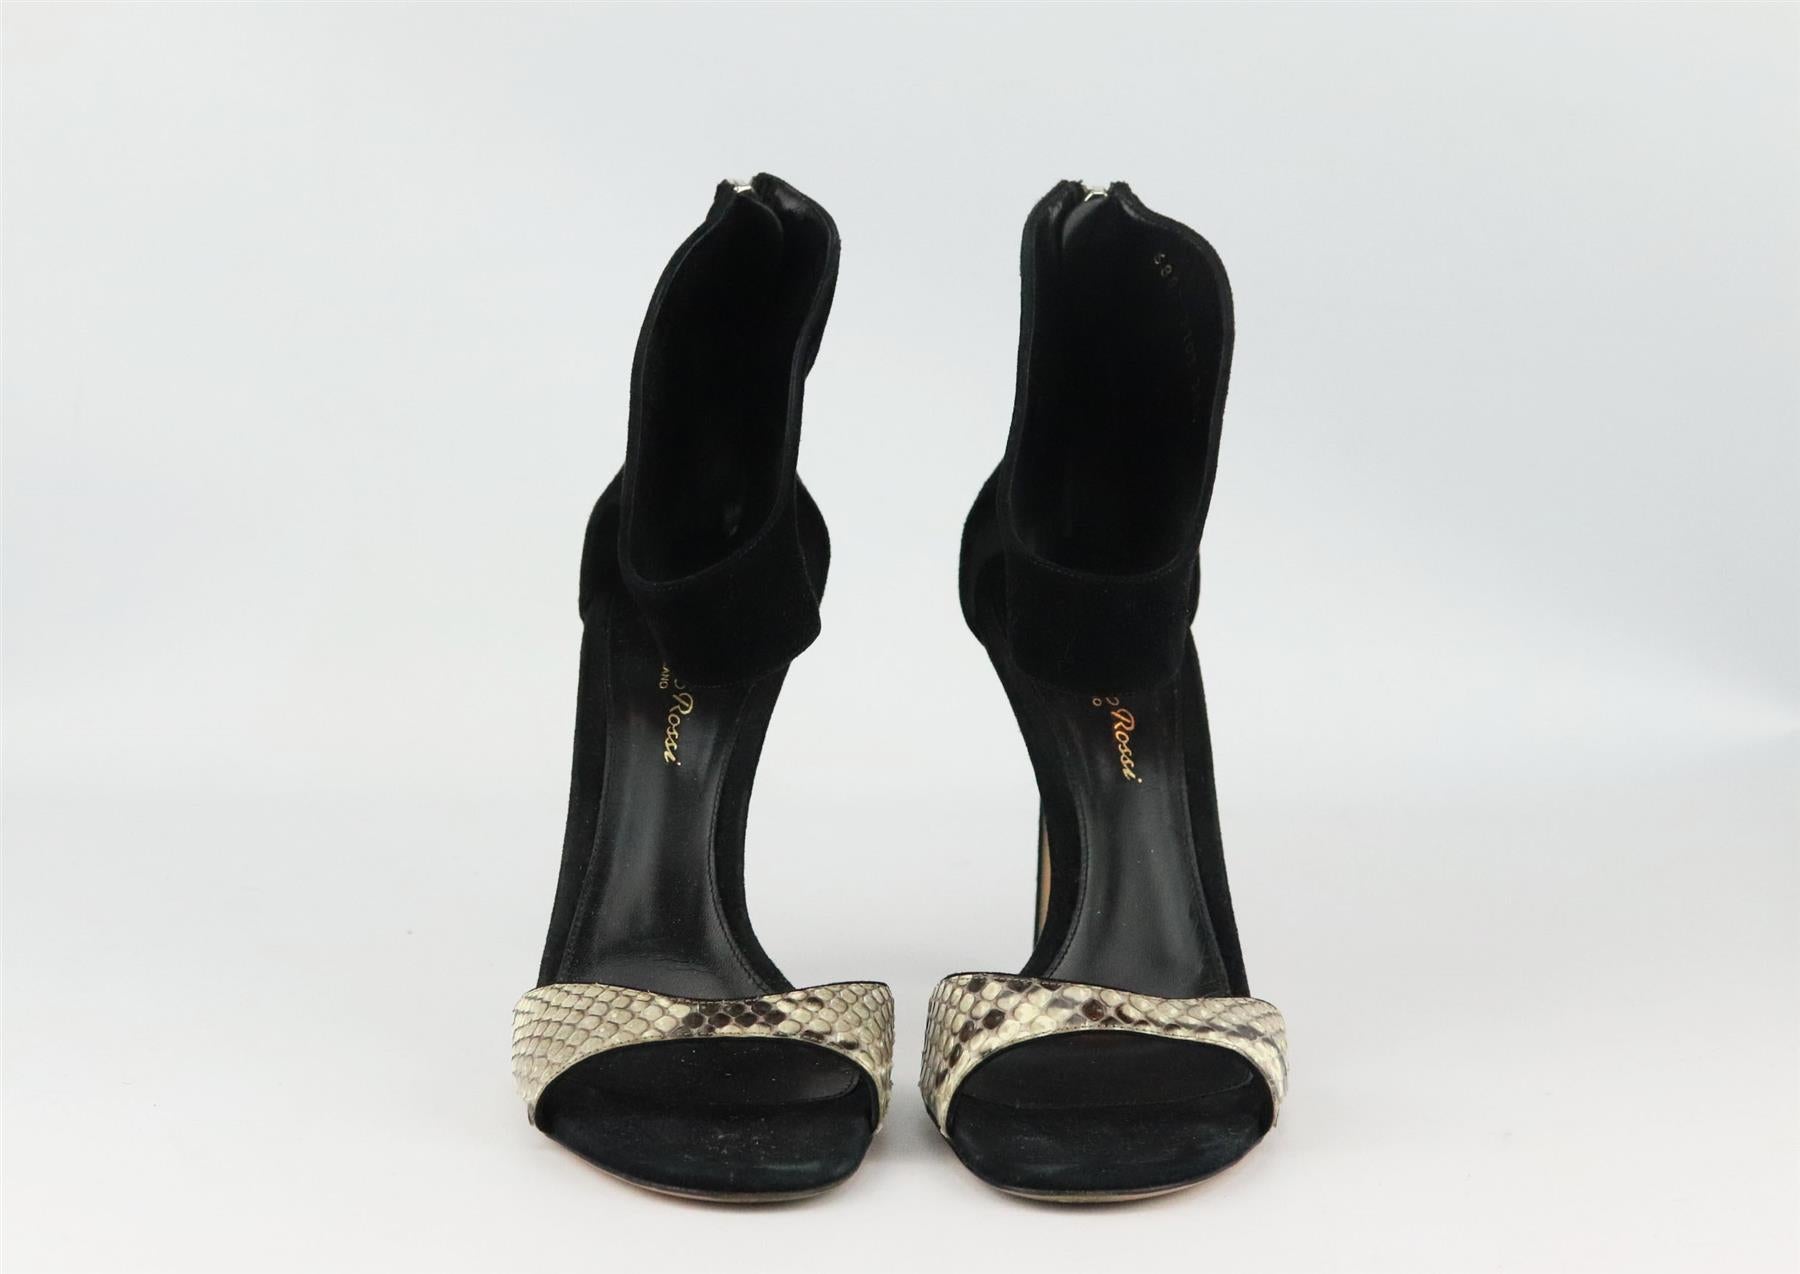 GIANVITO ROSSI PYTHON AND SUEDE SANDALS EU 38.5 UK 5.5 US 8.5